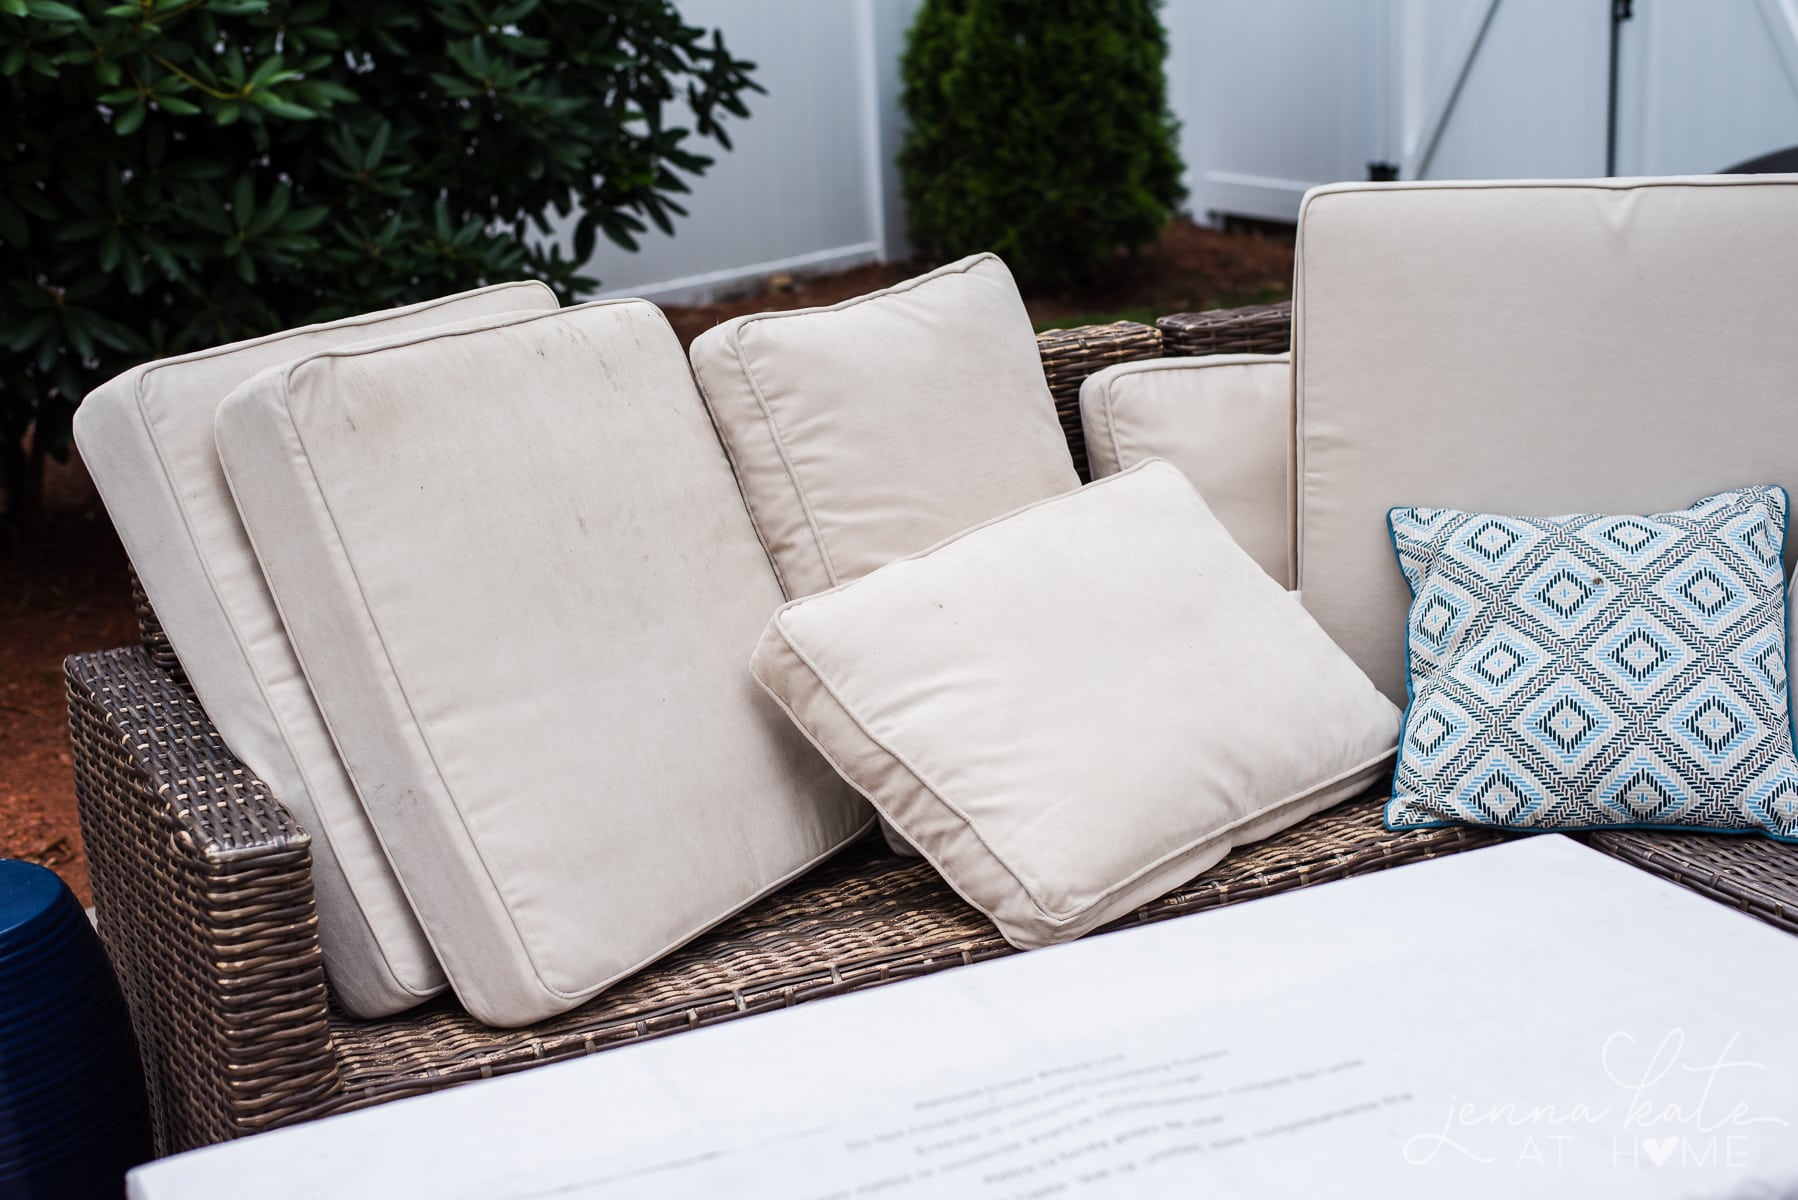 How To Clean Outdoor Cushions Jenna, How To Wash White Outdoor Cushions